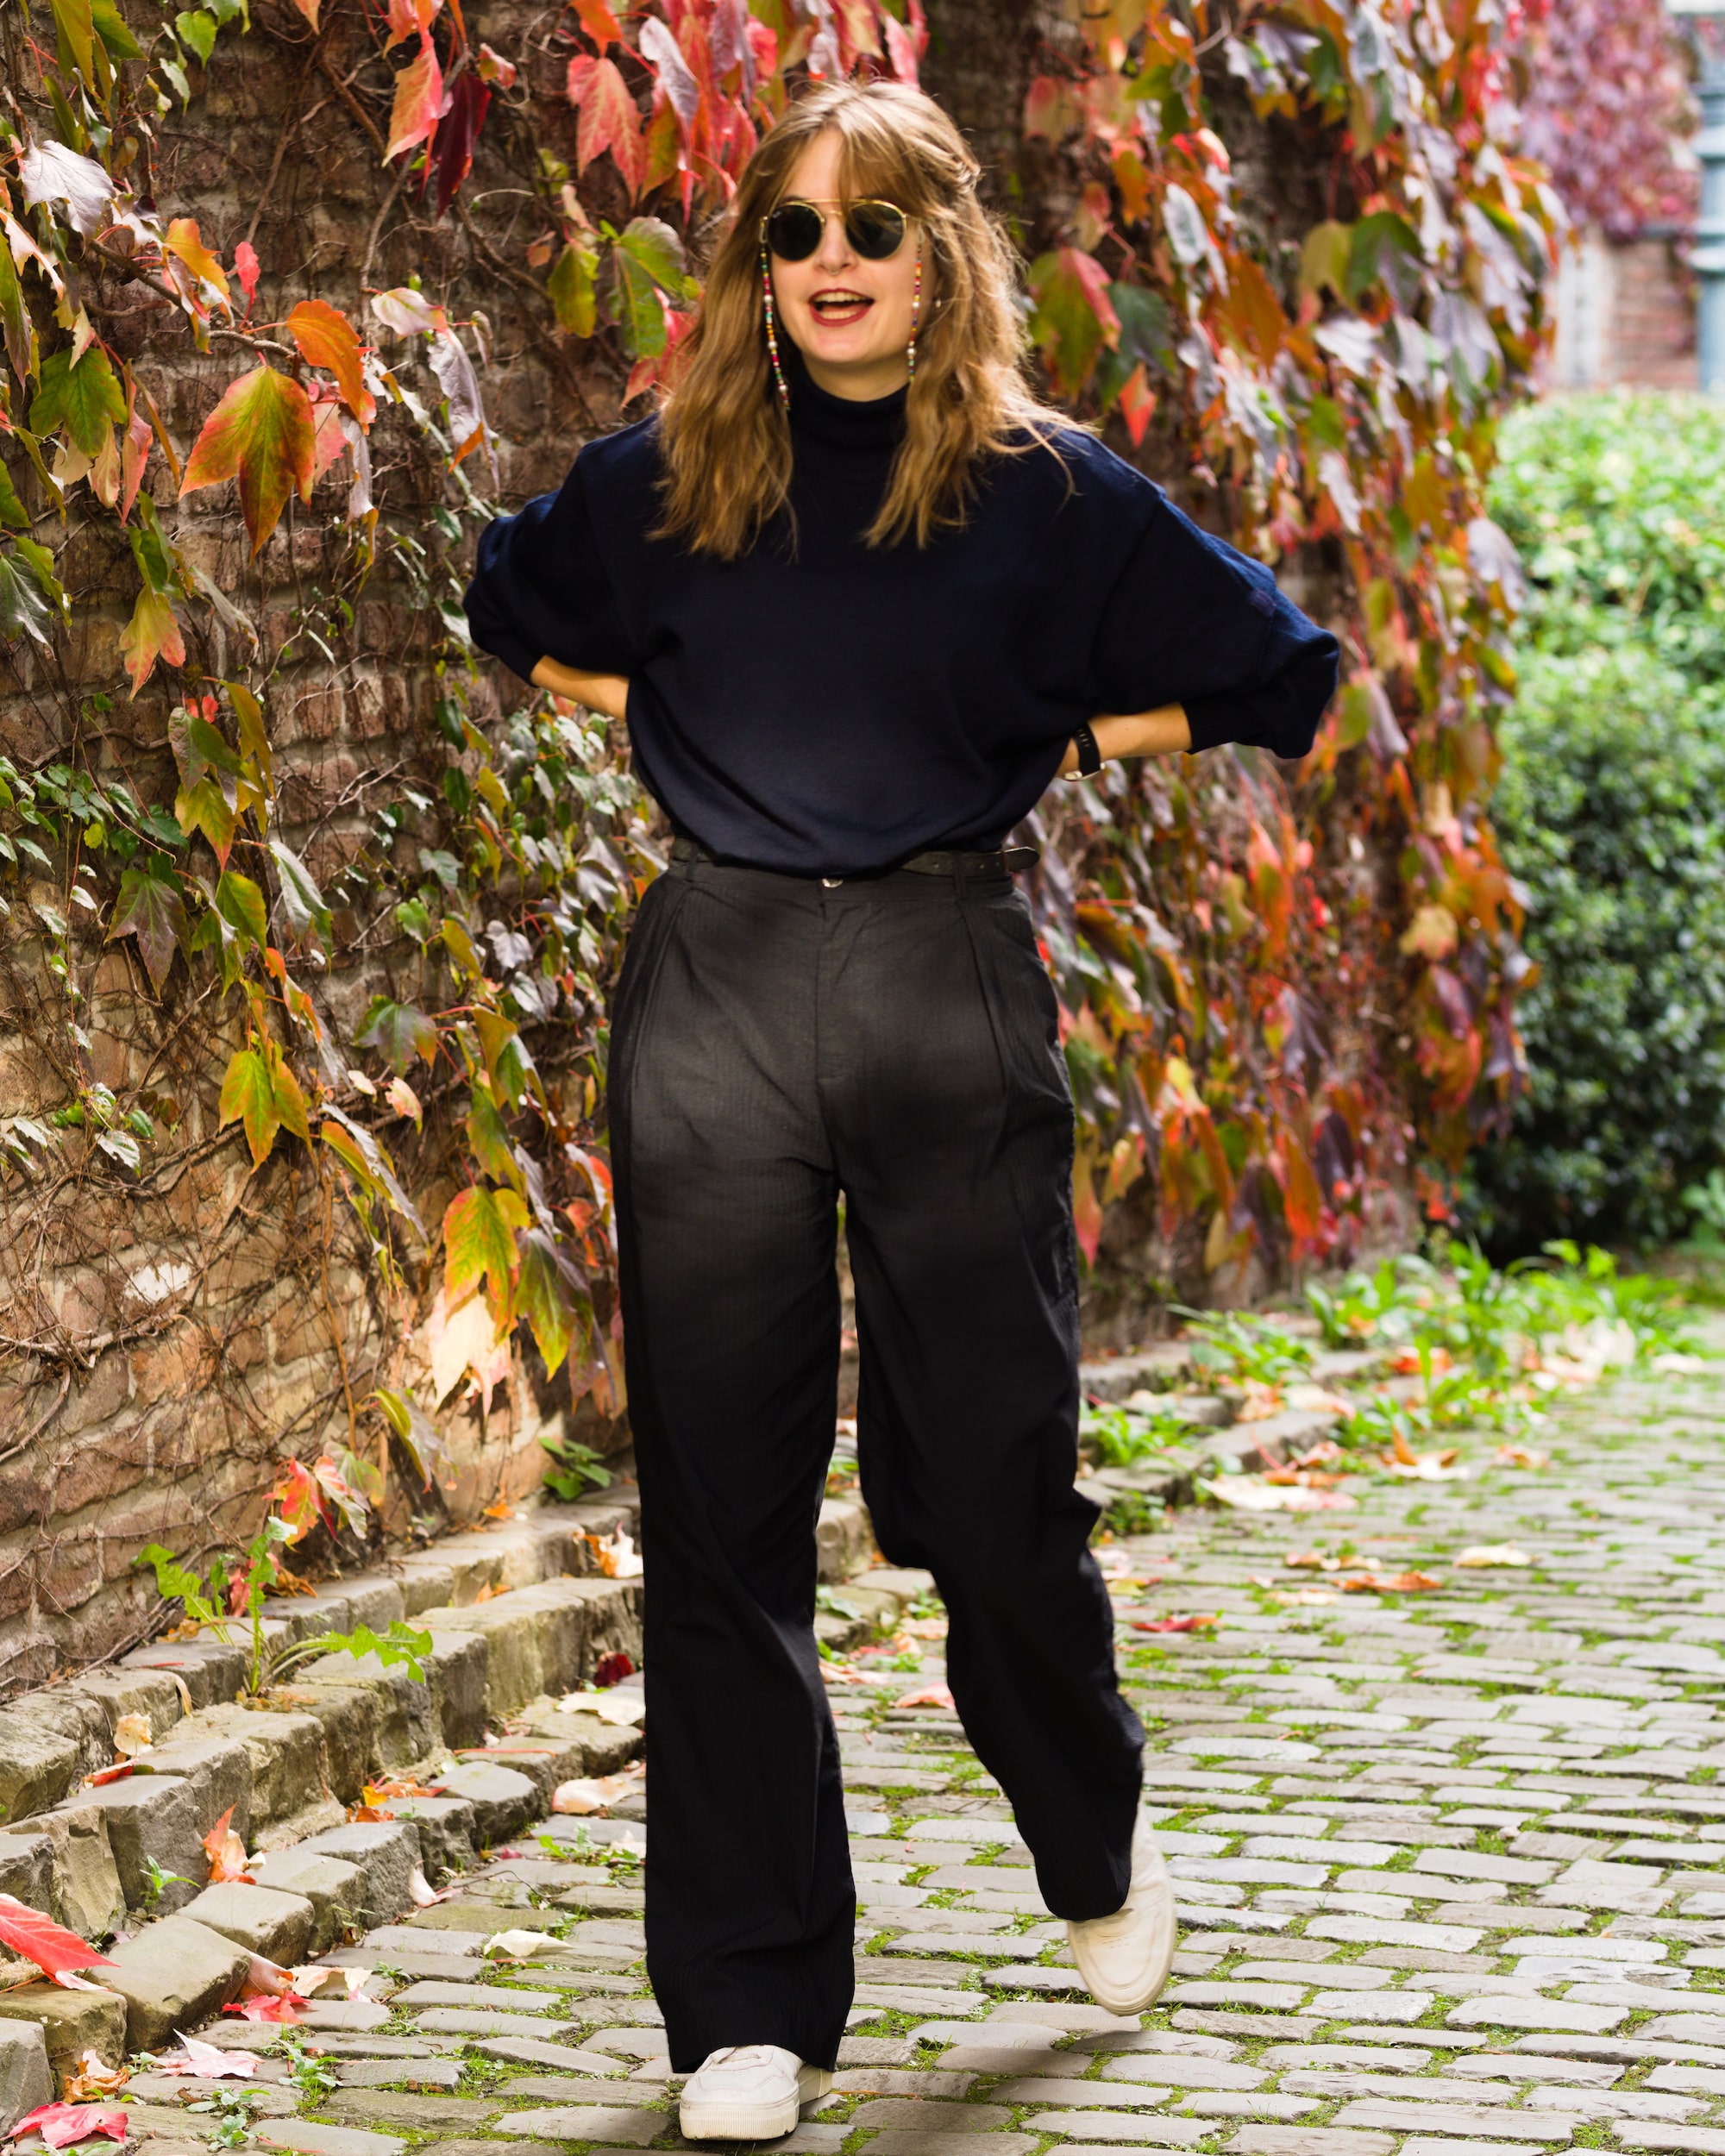 High Waist Tailored Trousers - Sewing Pattern